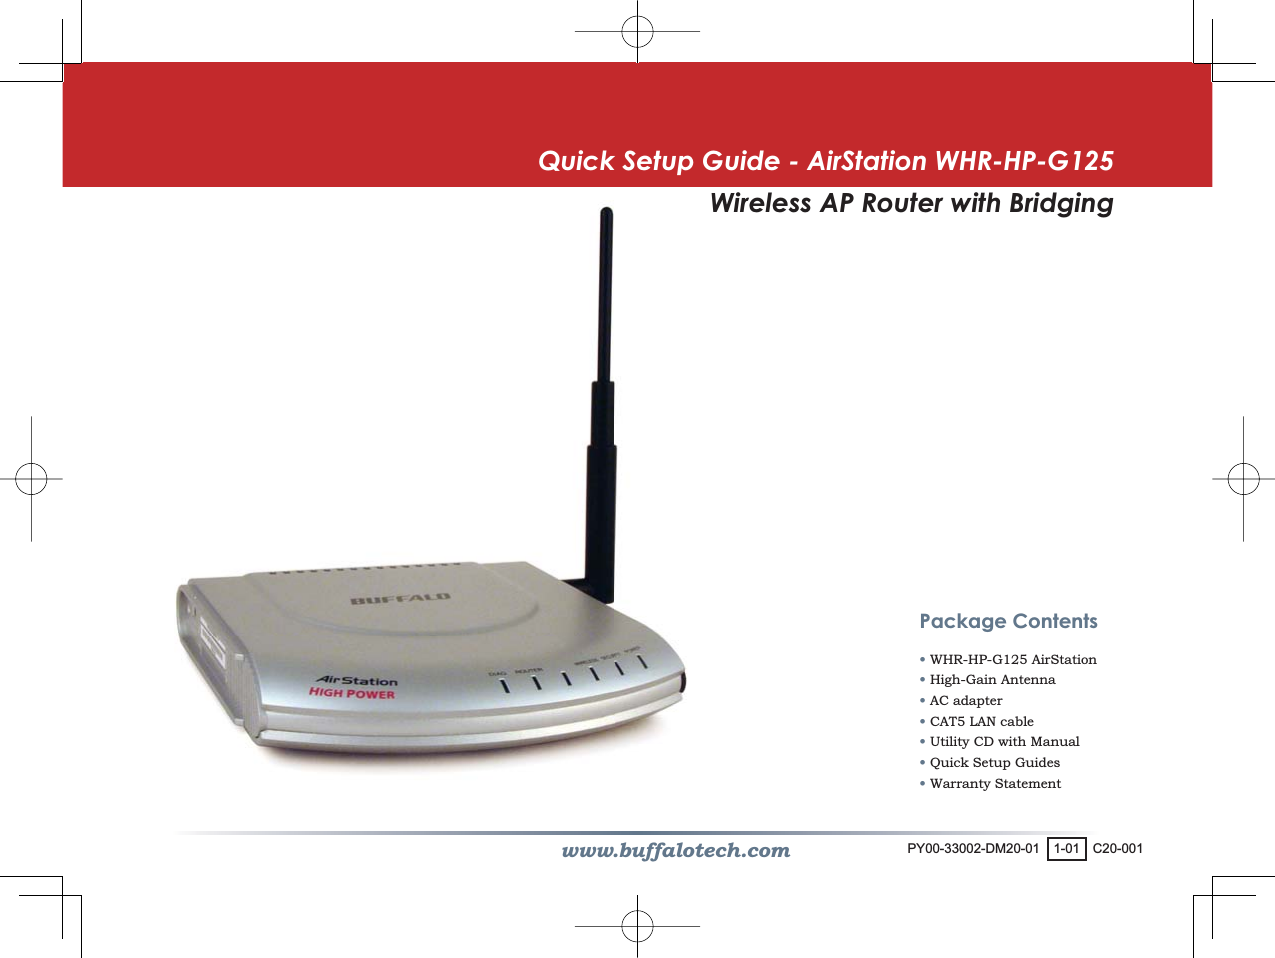 www.buffalotech.comQuick Setup Guide - AirStation WHR-HP-G125Wireless AP Router with BridgingPackage Contents• WHR-HP-G125 AirStation• High-Gain Antenna• AC adapter• CAT5 LAN cable • Utility CD with Manual• Quick Setup Guides• Warranty StatementPY00-33002-DM20-01 1-01 C20-001